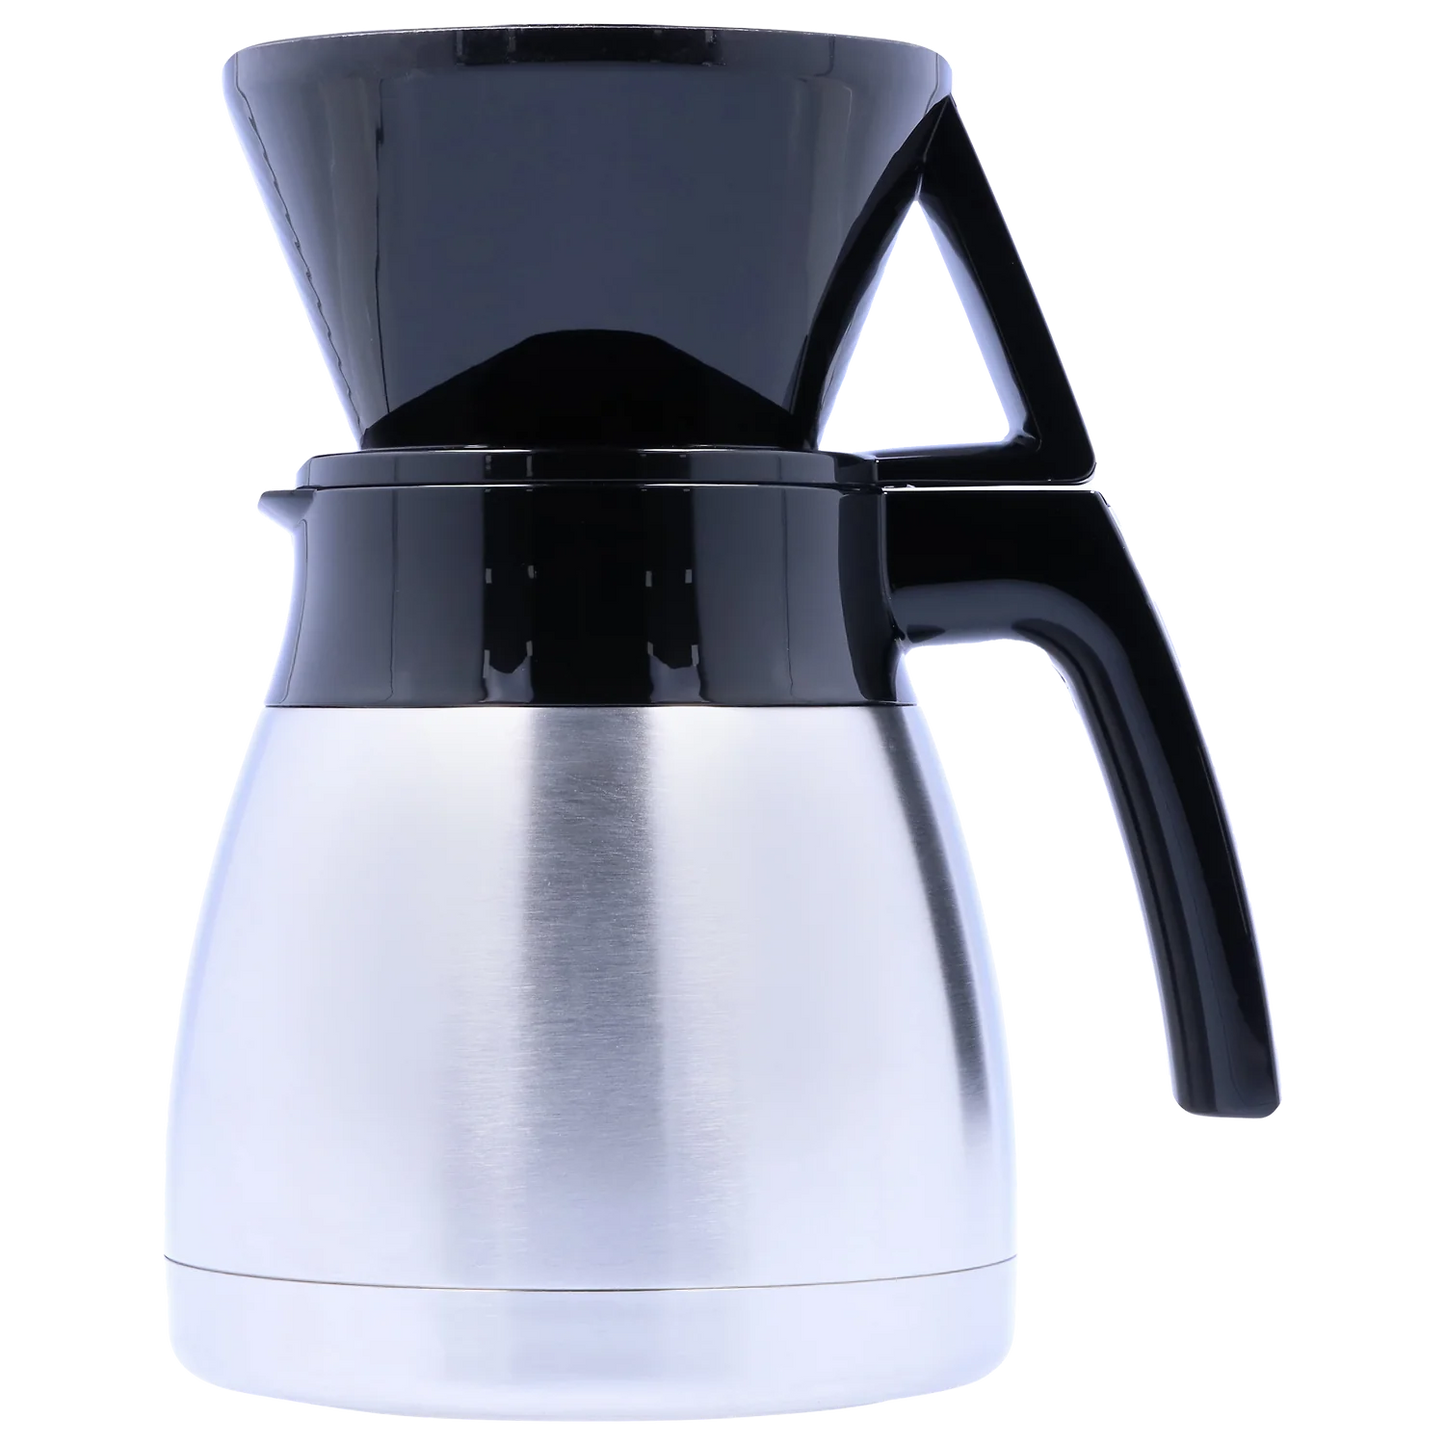 Thermal Pour-Over™ Coffeemaker & Stainless Carafe Set – Melitta USA